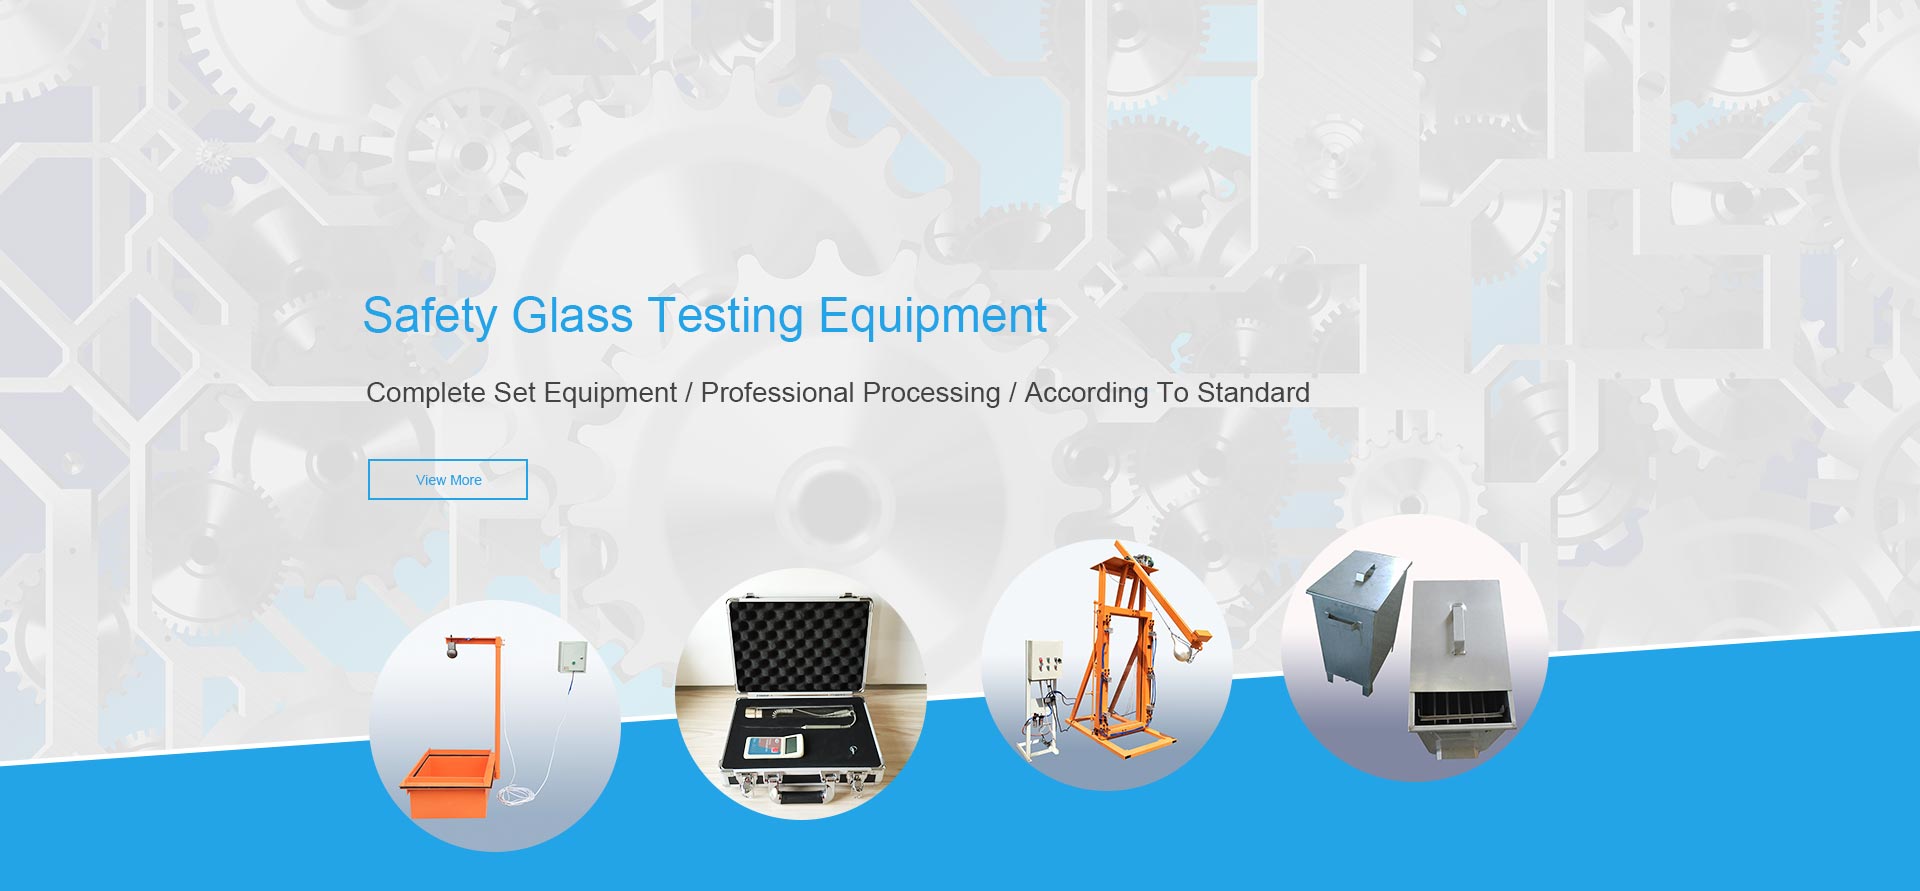 Safety Glass Testing Equipment